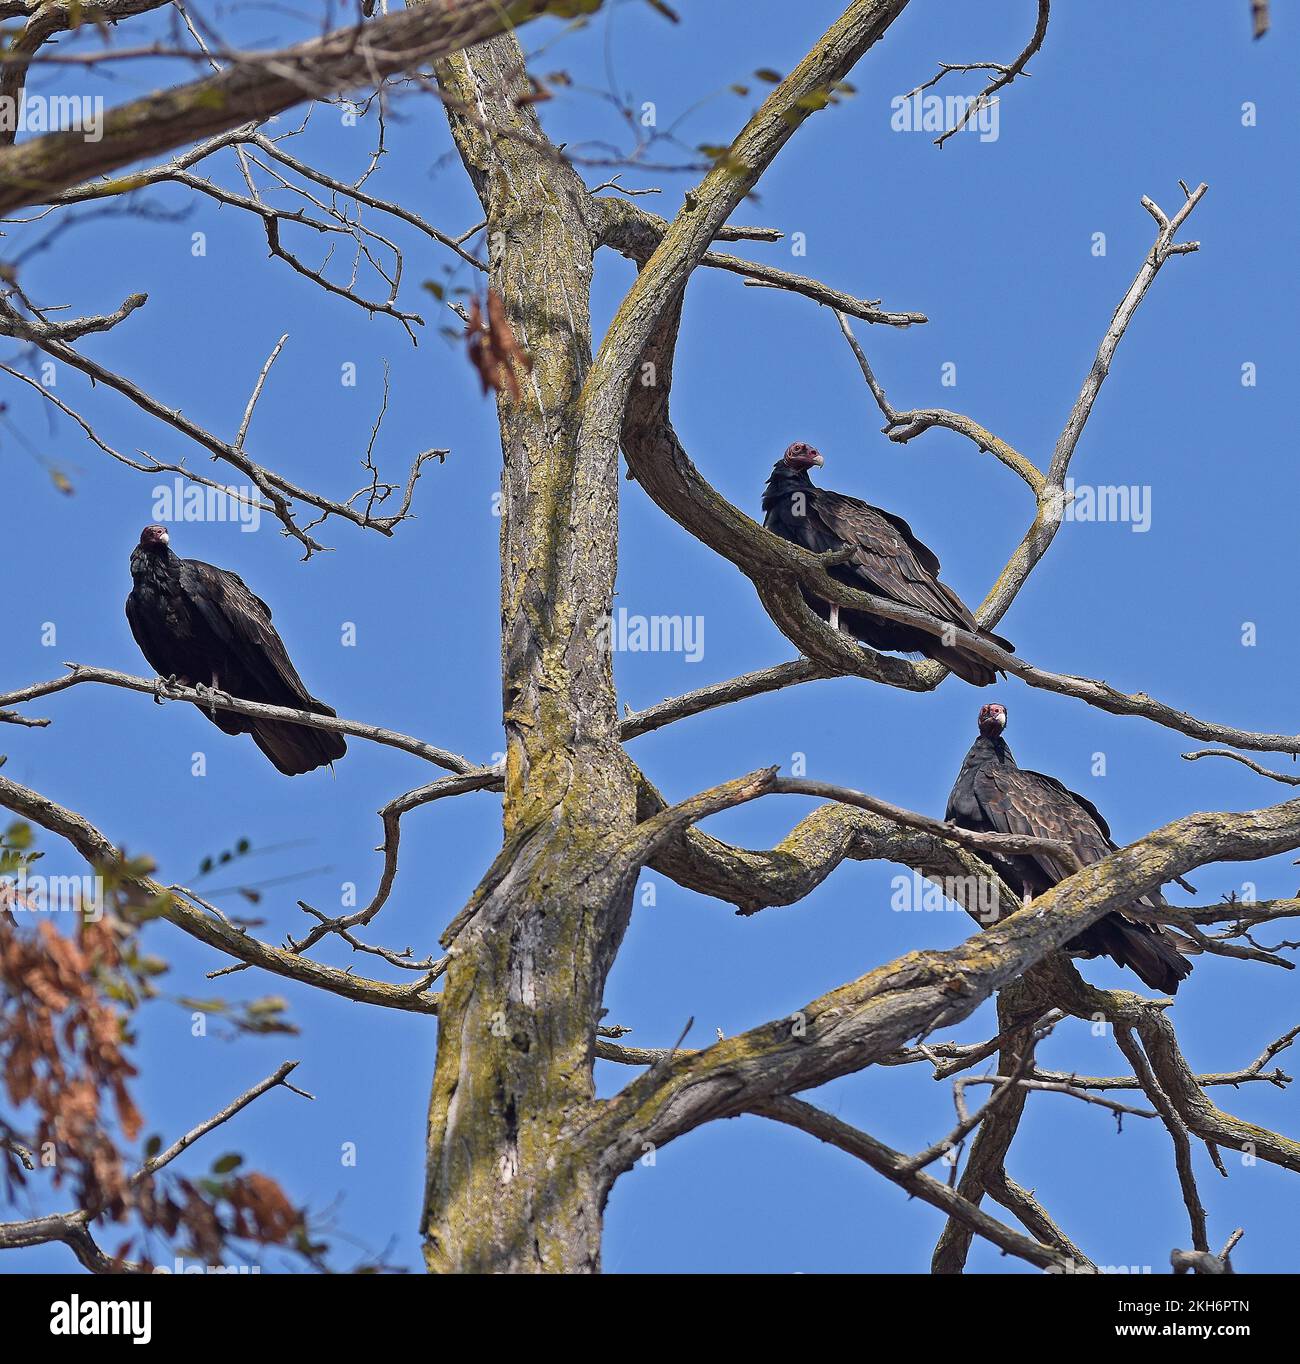 Turkey Vultures in a tree at Quarry Lakes Regional Recreation Area,, California Stock Photo